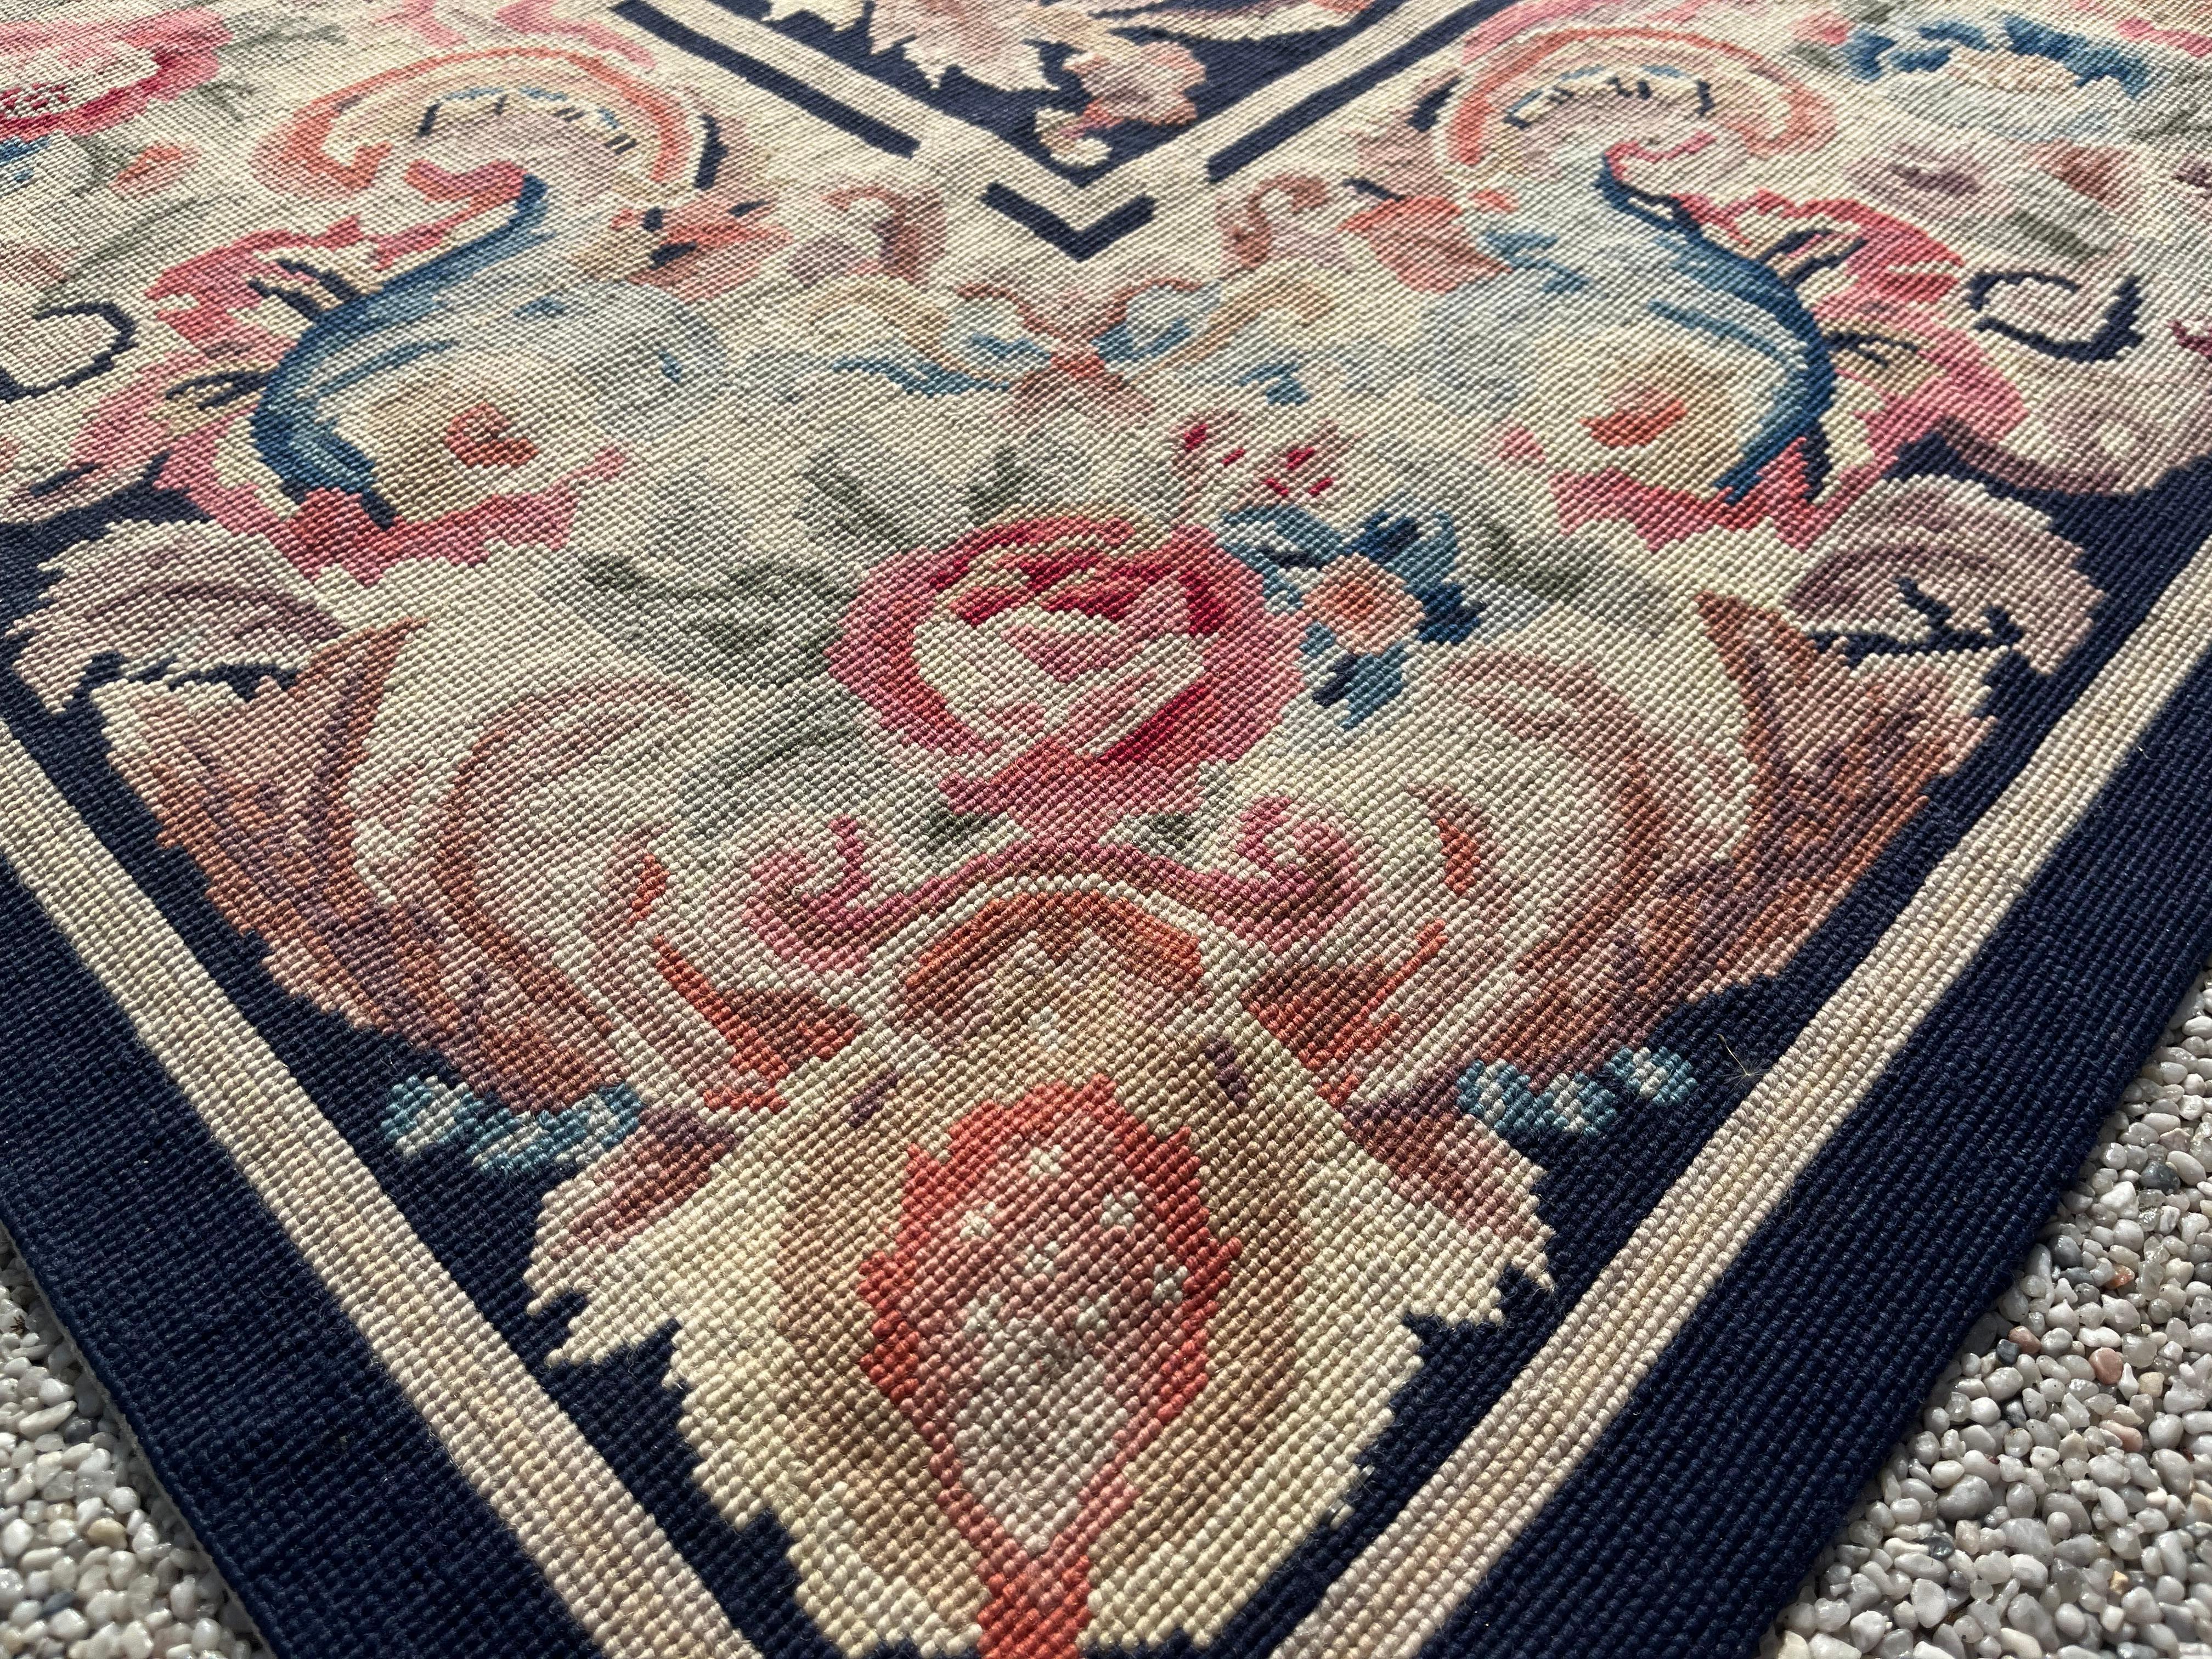 Carpet with knotted stitches in the style of Aubusson For Sale 3